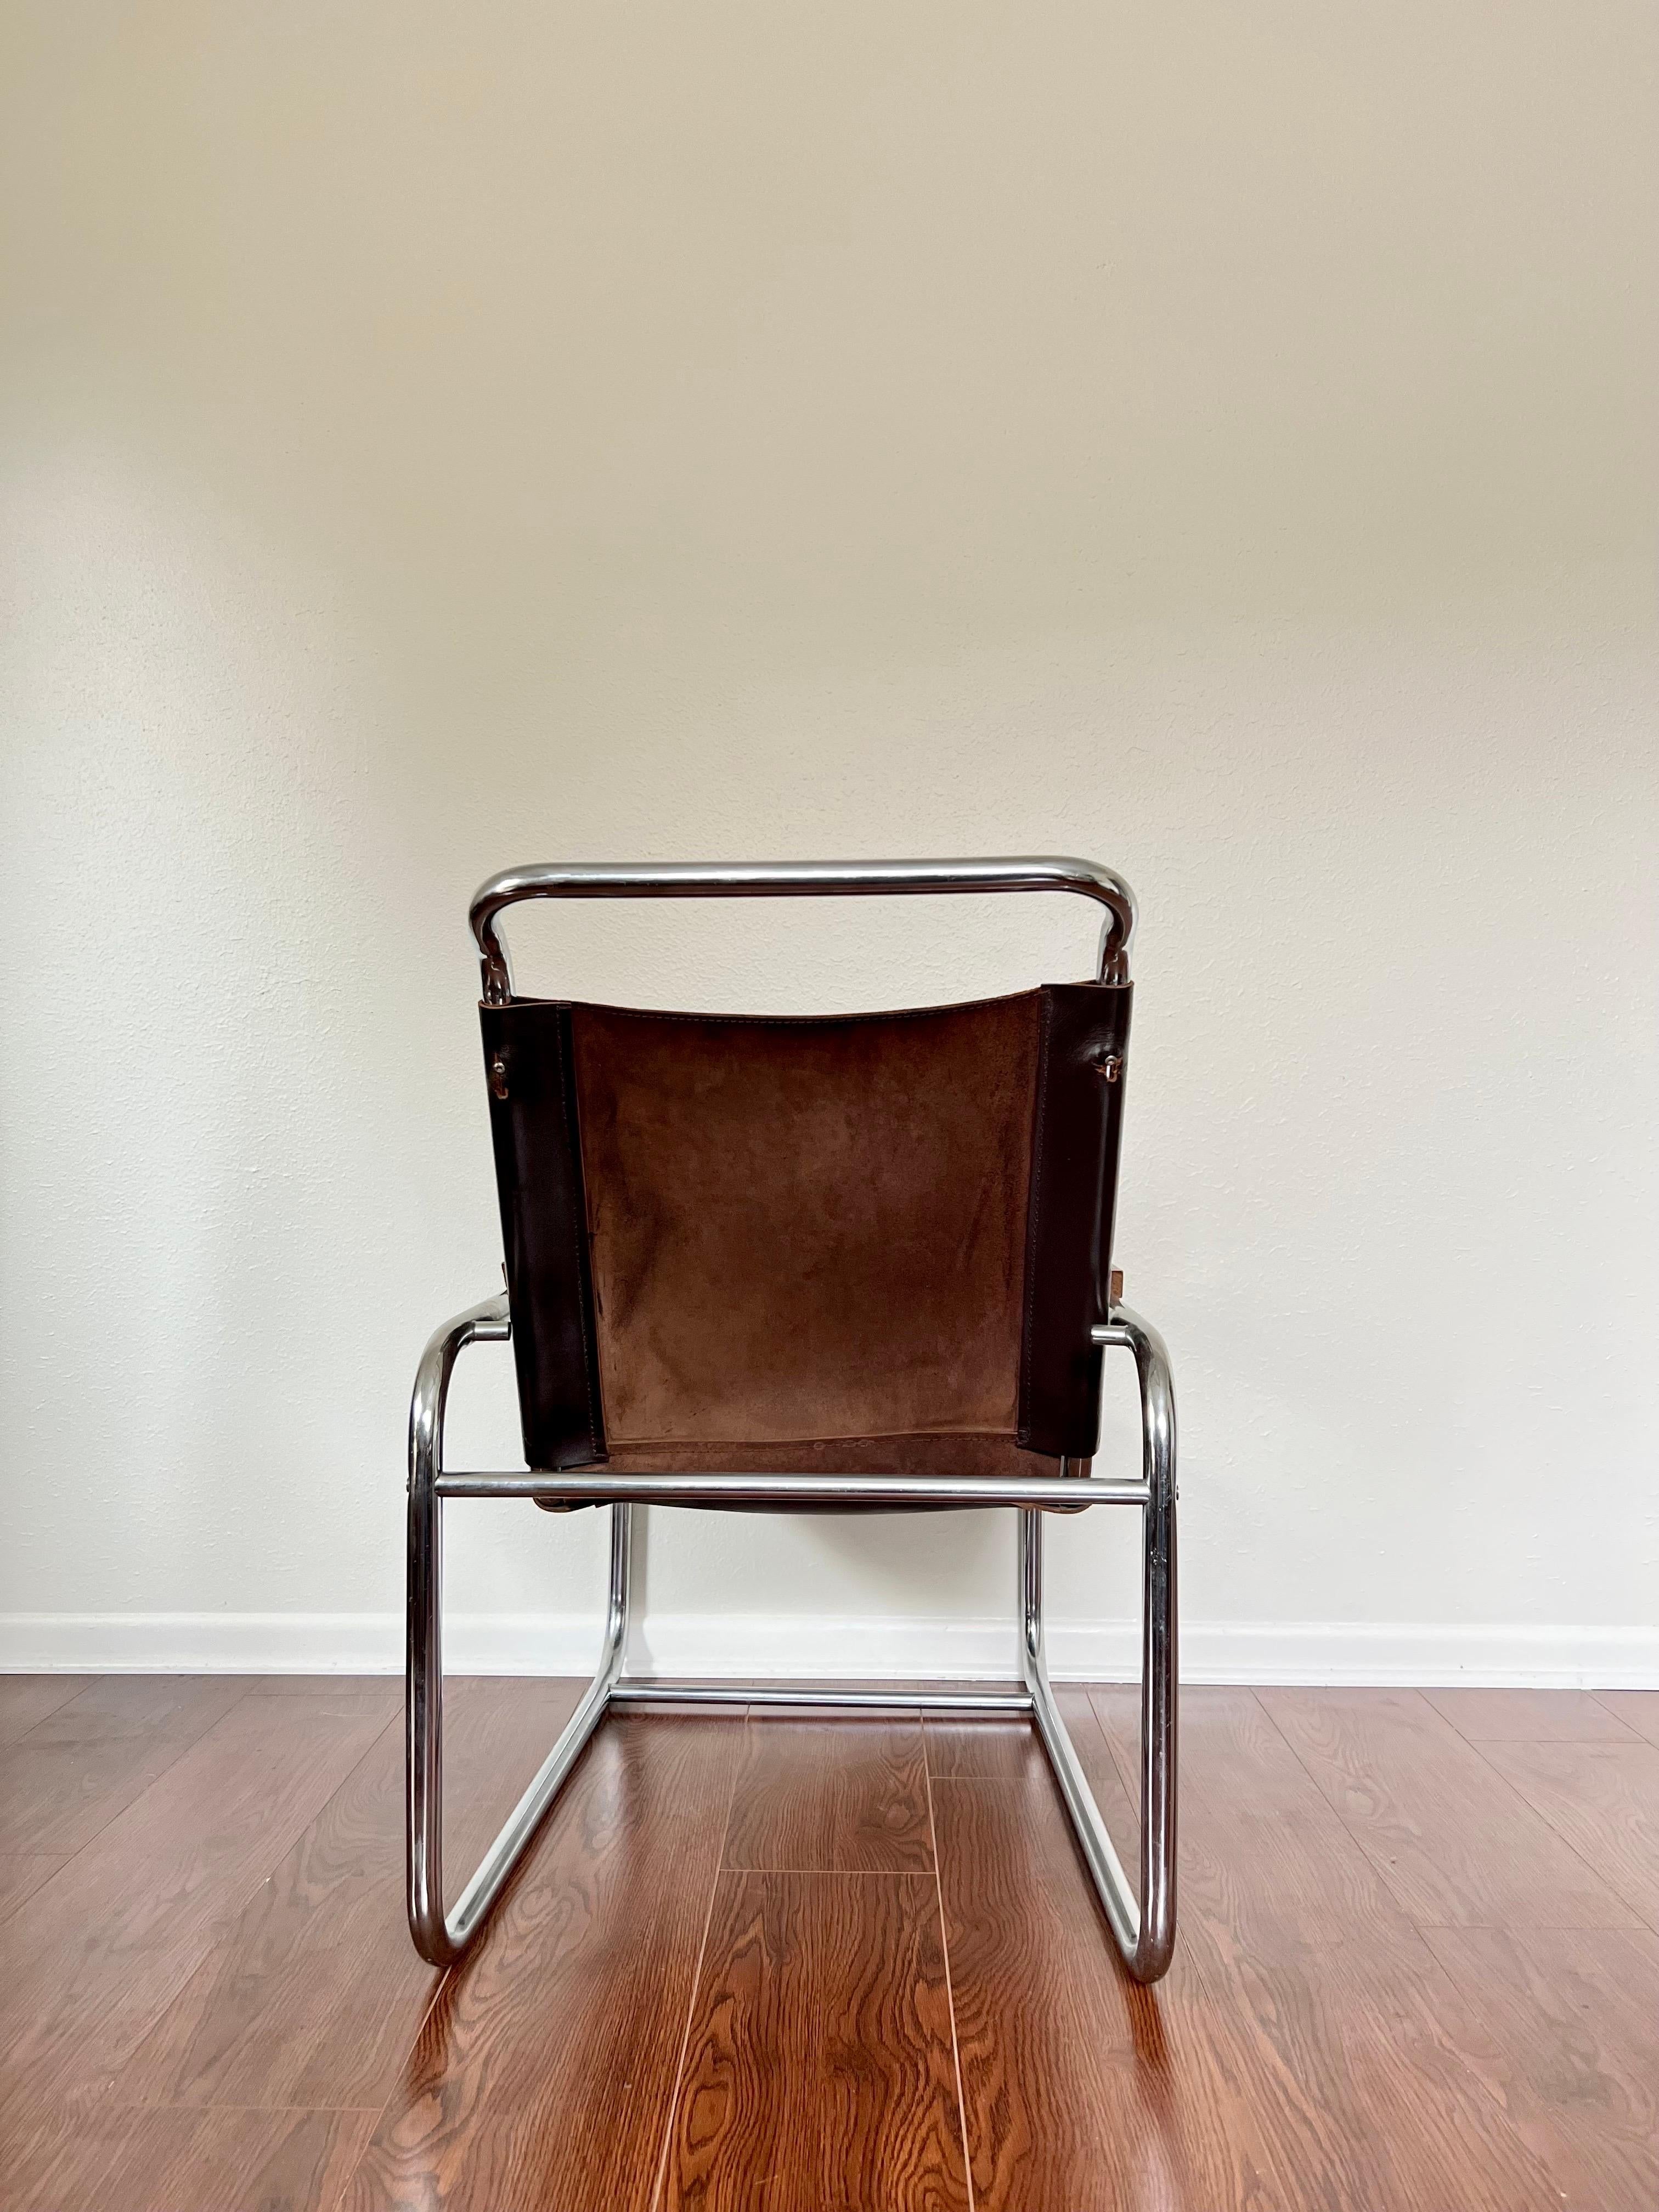 Original 1960s cantilever Marcel Breuer B35 brown leather lounge chair with wood arm rests. Leather and chrome are in great vintage condition. The comfiest and most stylish chair you will ever sit in. 

Dimensions:
34” H x 24” W x 32” D
Seat